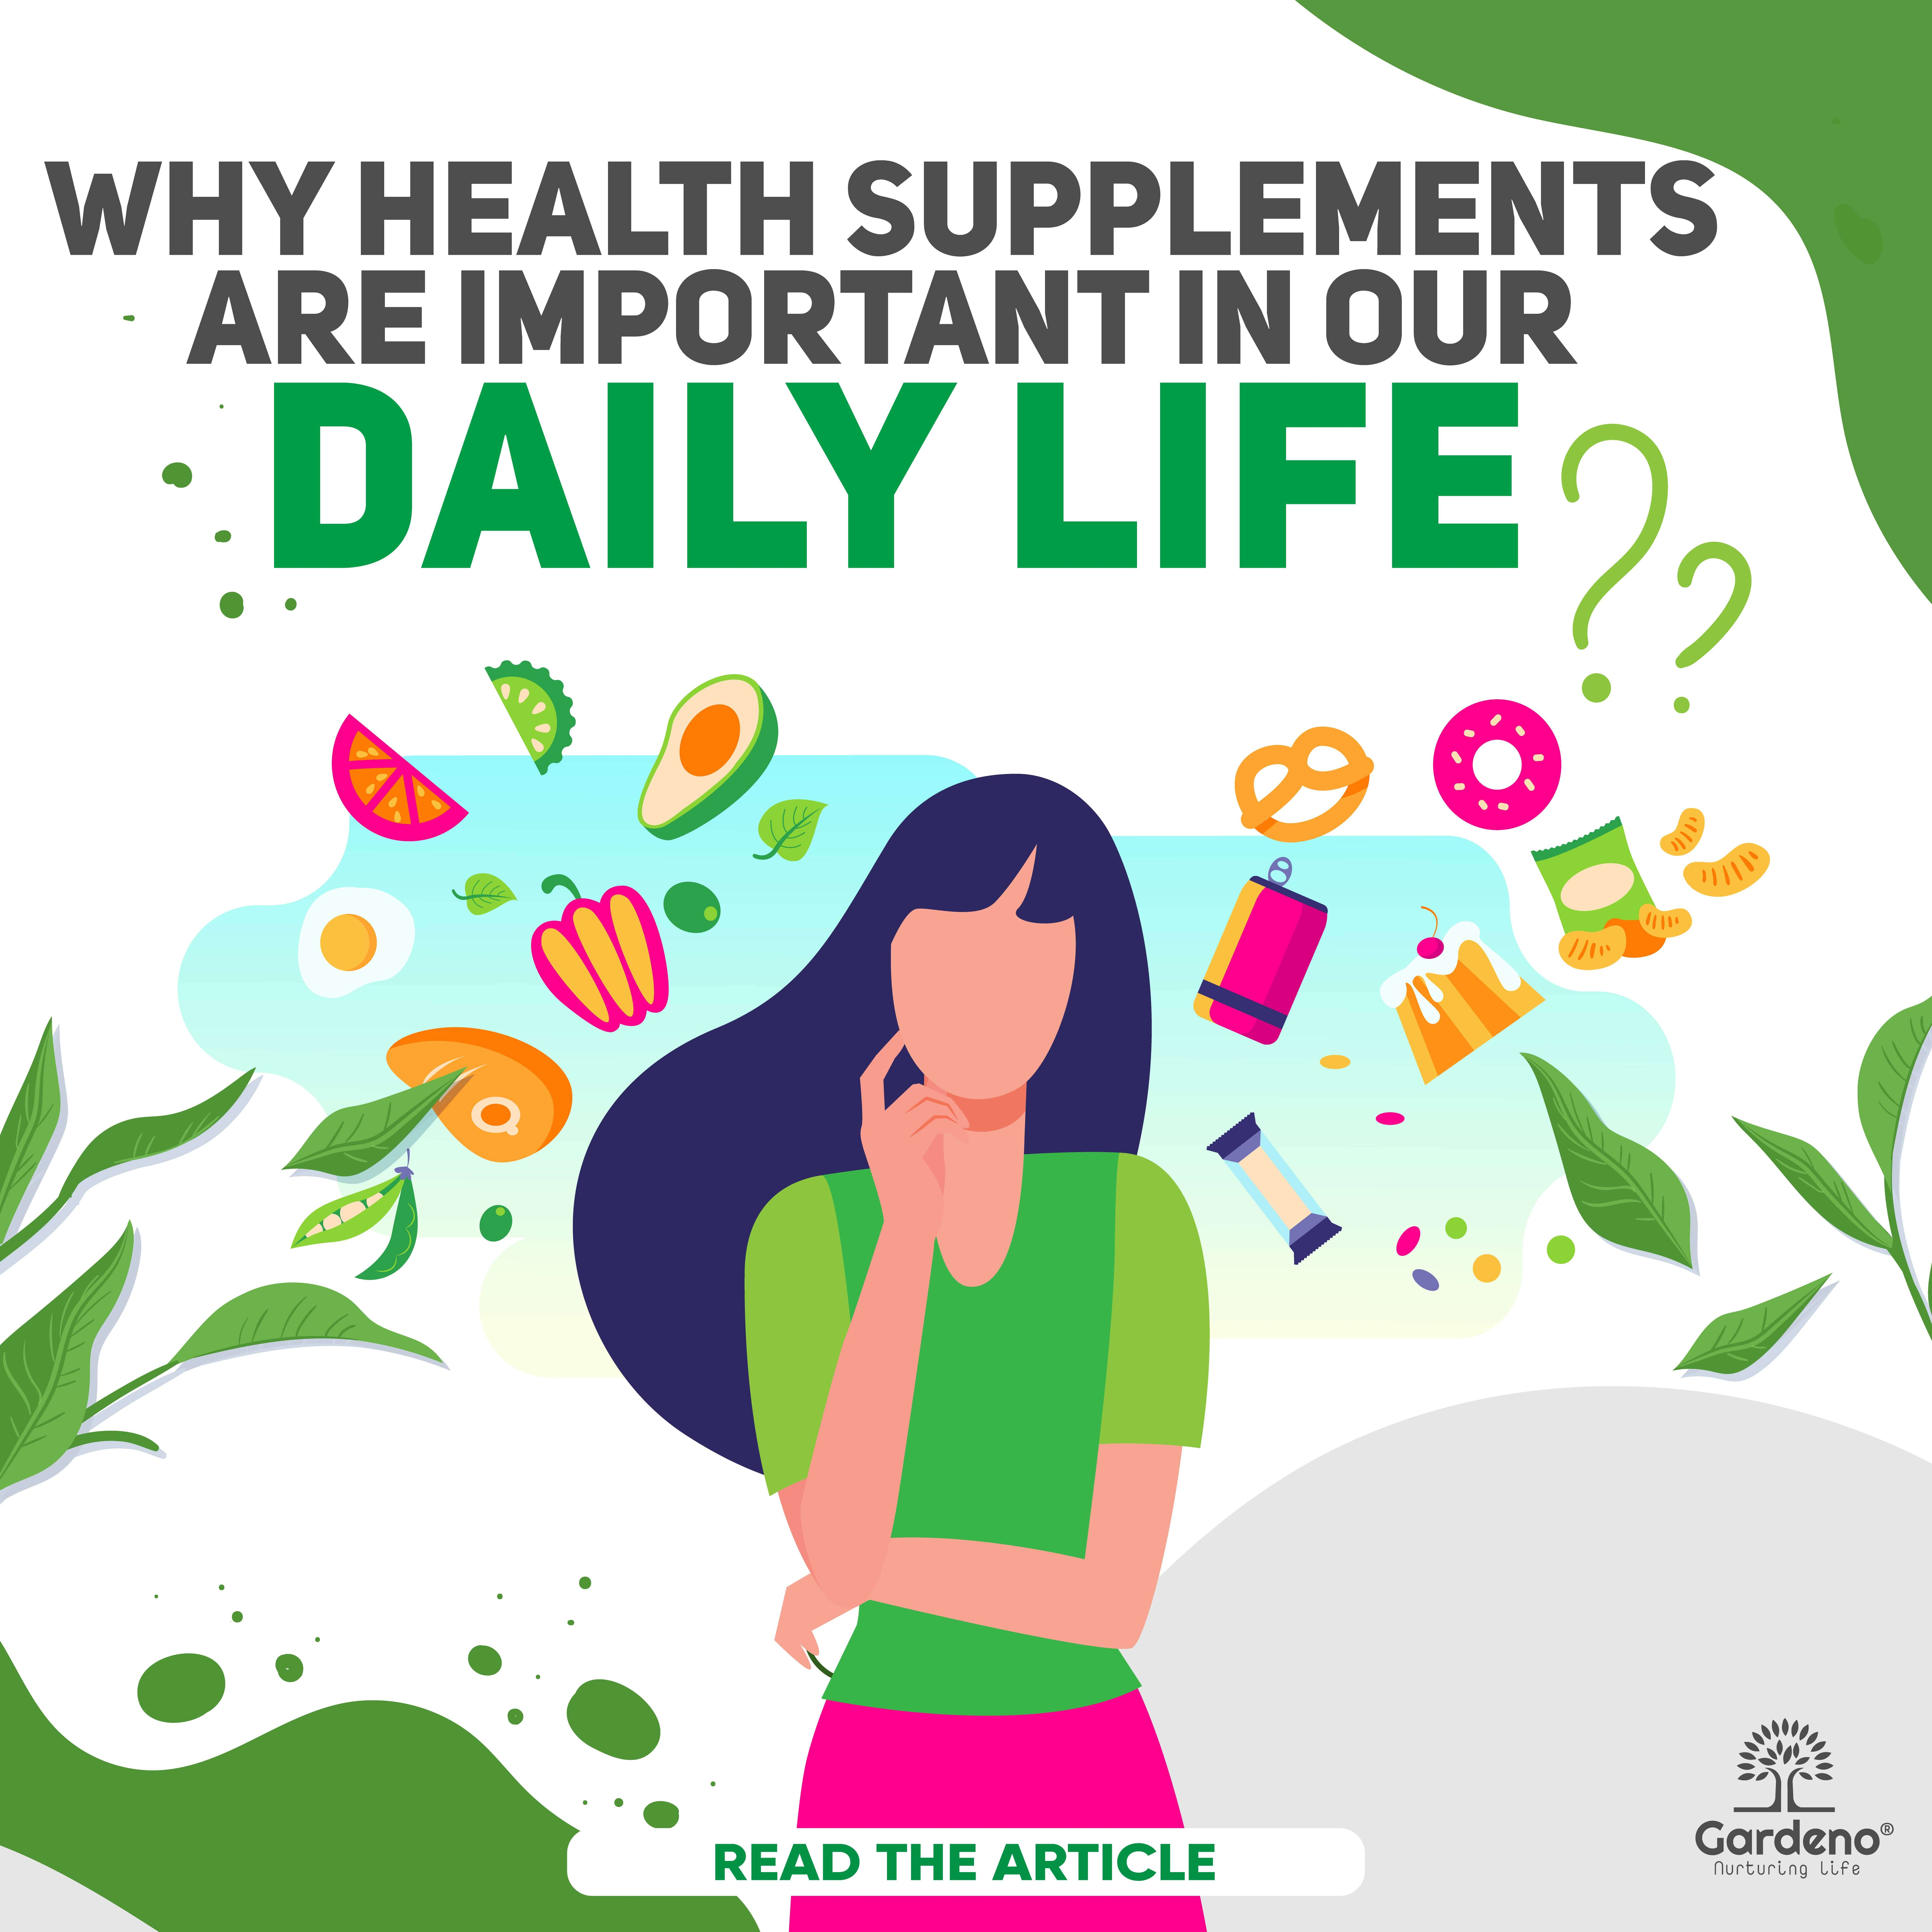 Why do we need health supplements